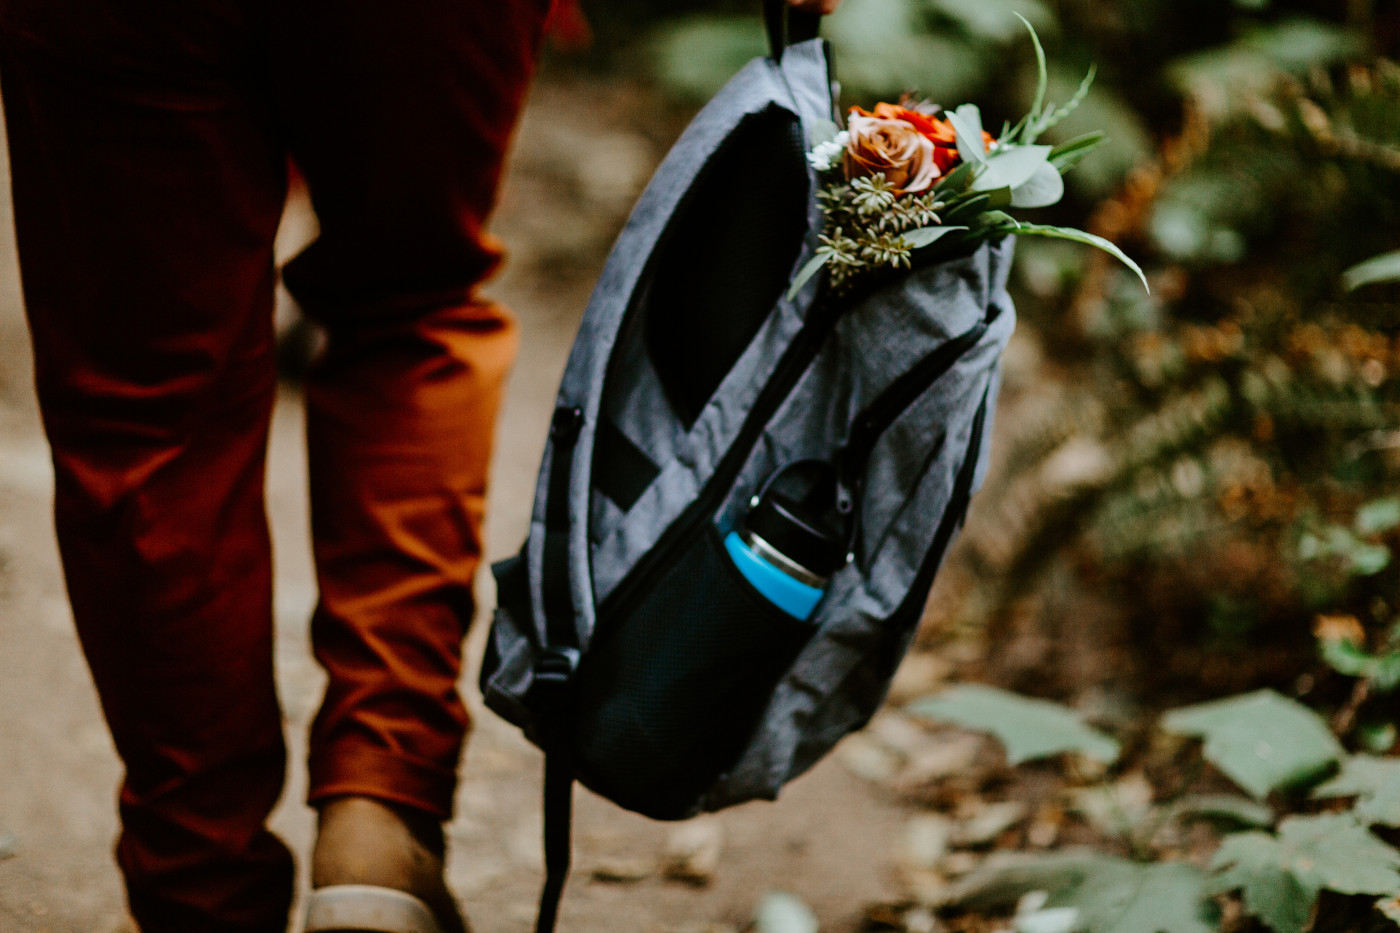 TJ holds his backpack with the bouquet as he hikes to his elopement ceremony spot.